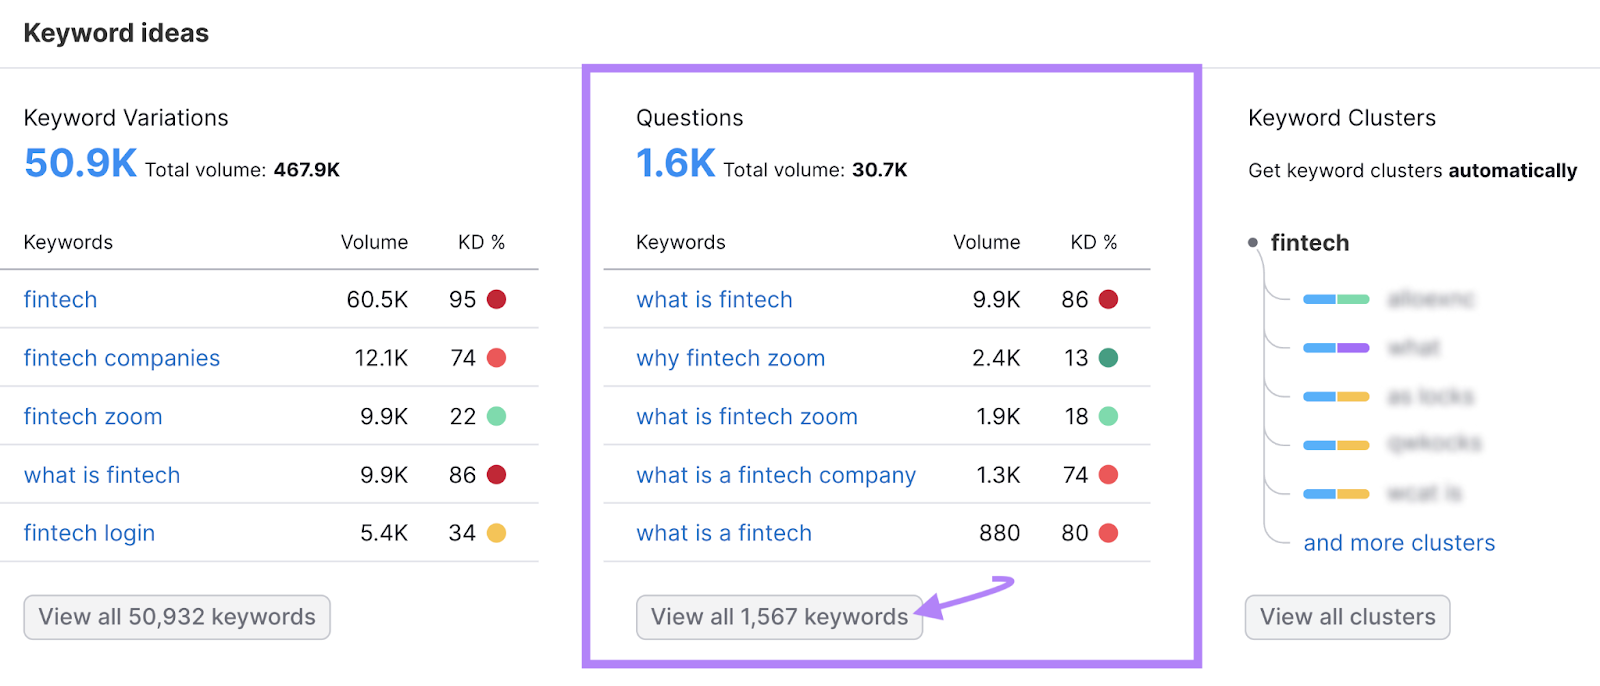 "Questions" section of Keyword Overview report for "fintech"